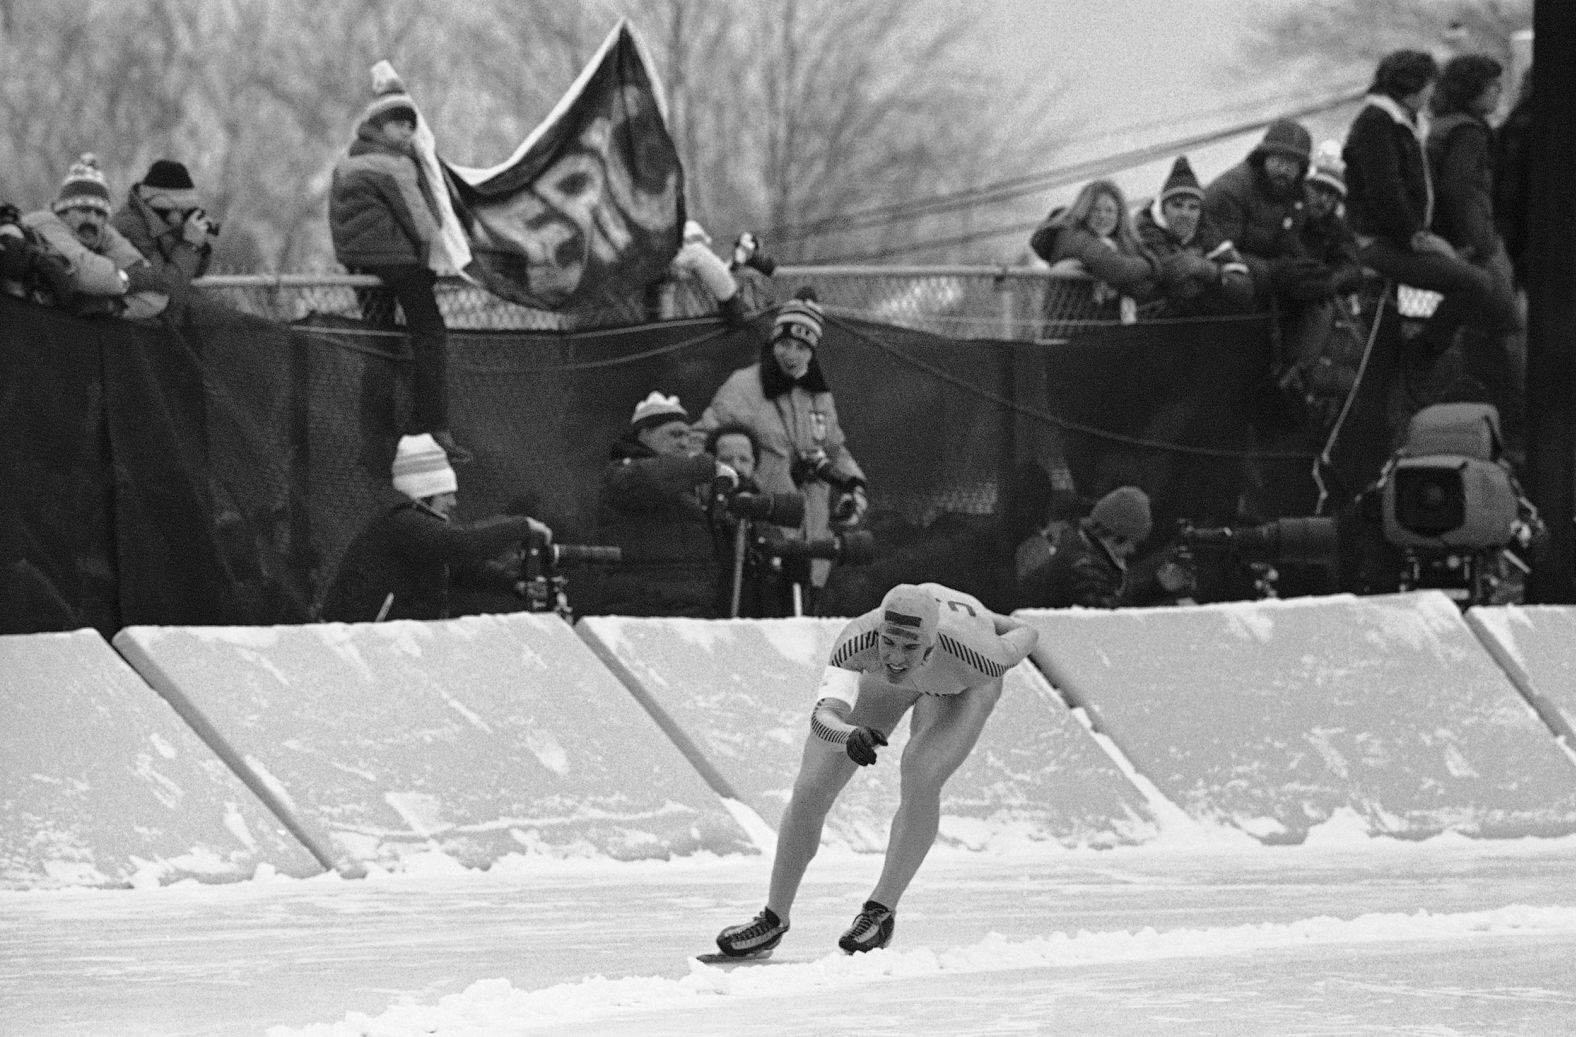 US speedskater Eric Heiden dominated at the Lake Placid Games in 1980, winning all five races from the 500-meter sprint to the 10,000-meter distance event. He set a world record in the latter and set Olympic records in the other races. To this day, he remains the only Winter Olympian to win five individual gold medals at a single Games.